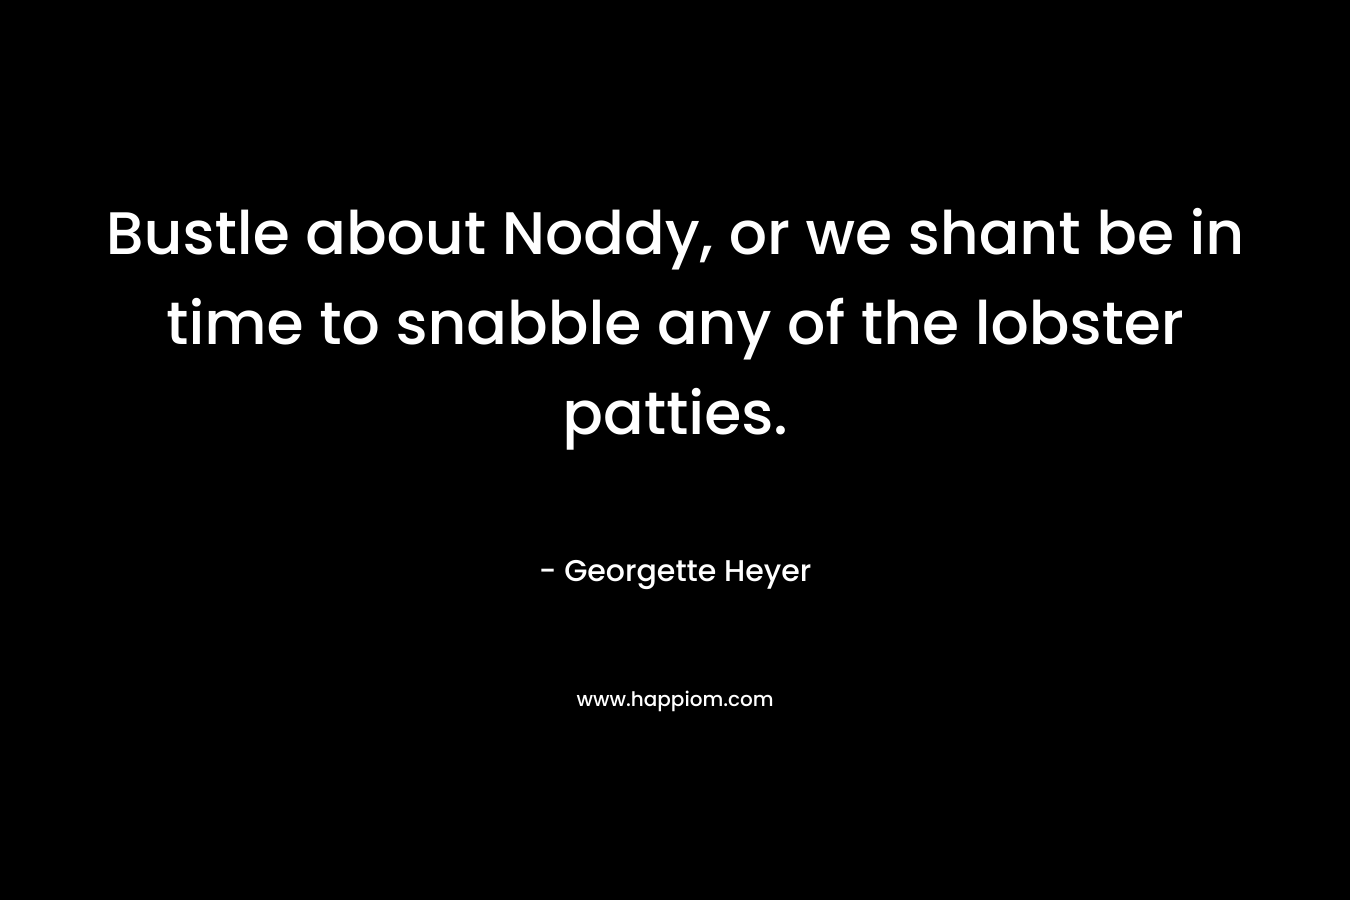 Bustle about Noddy, or we shant be in time to snabble any of the lobster patties. – Georgette Heyer